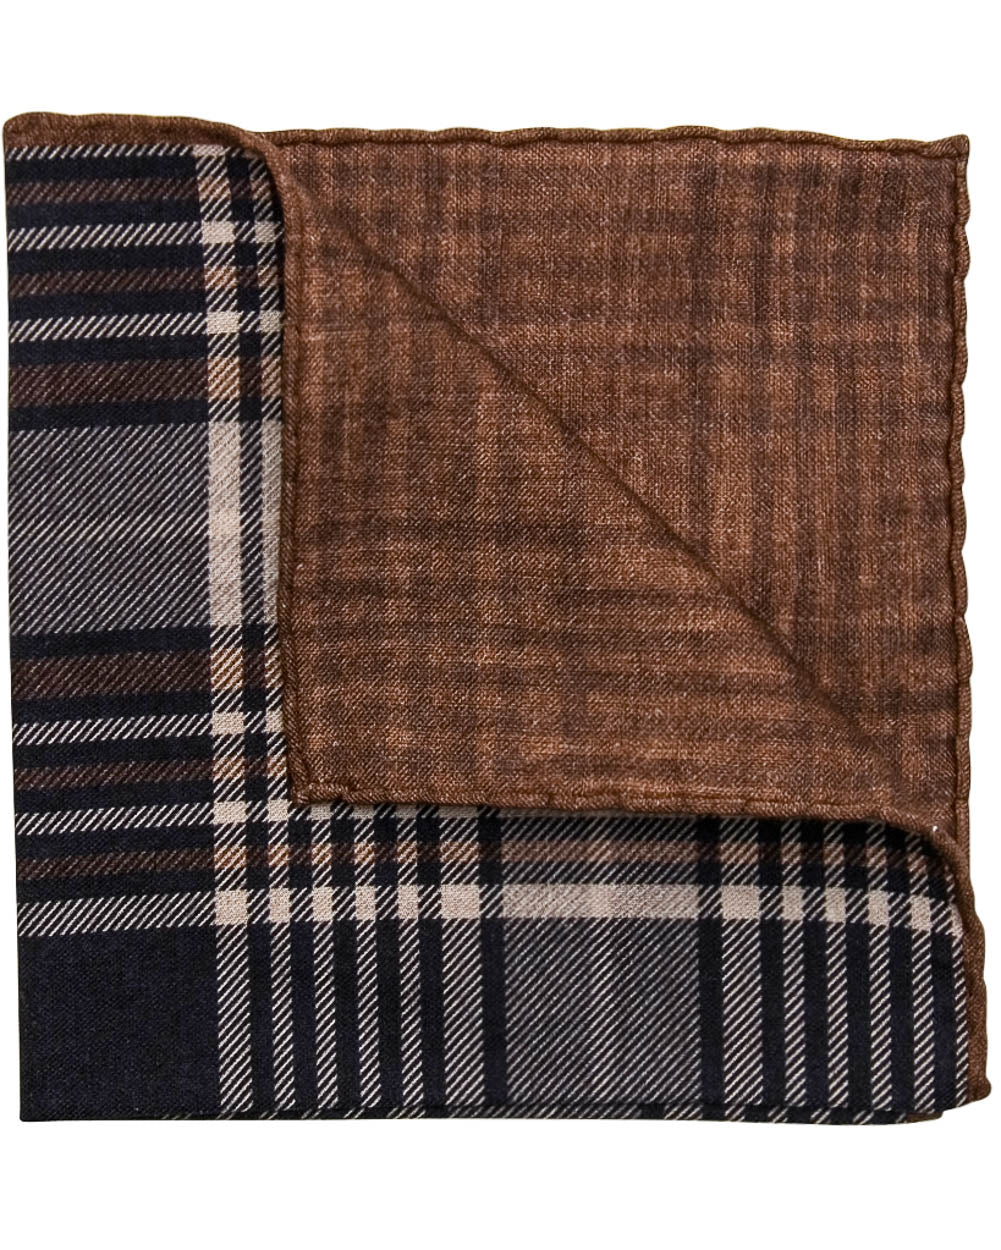 Navy Taupe and Brown Plaid Pocket Square